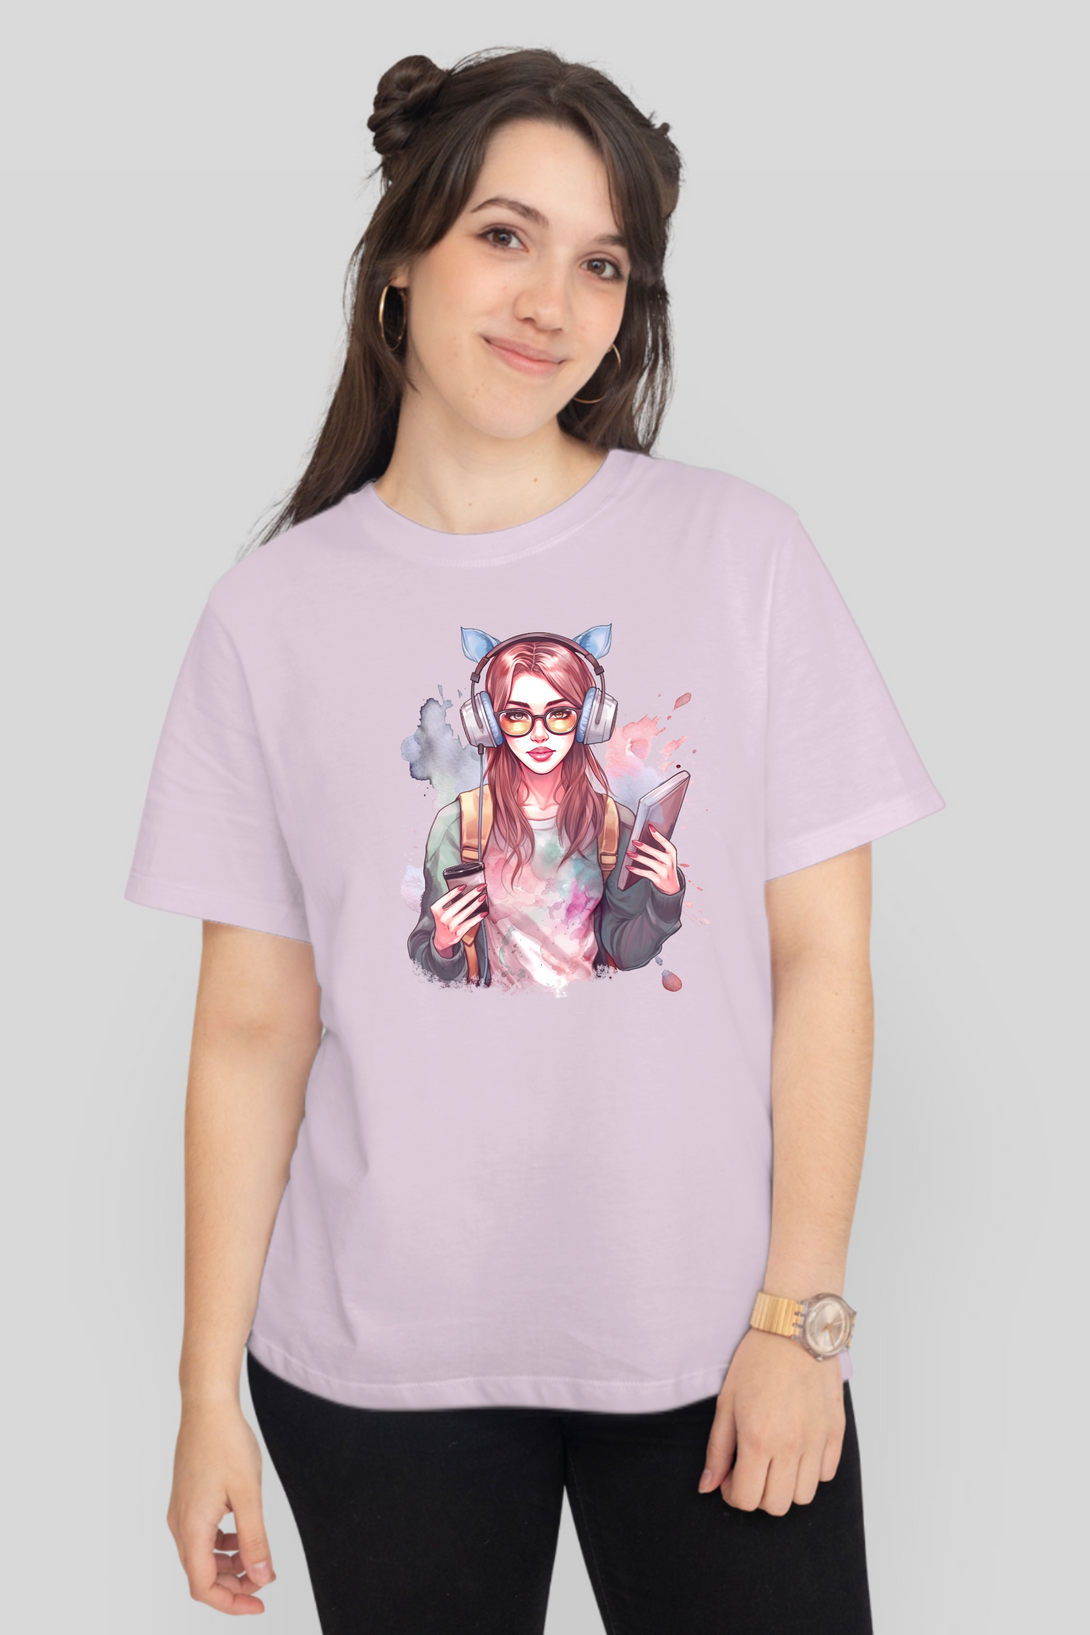 Artistic Student Printed T-Shirt For Women - WowWaves - 8